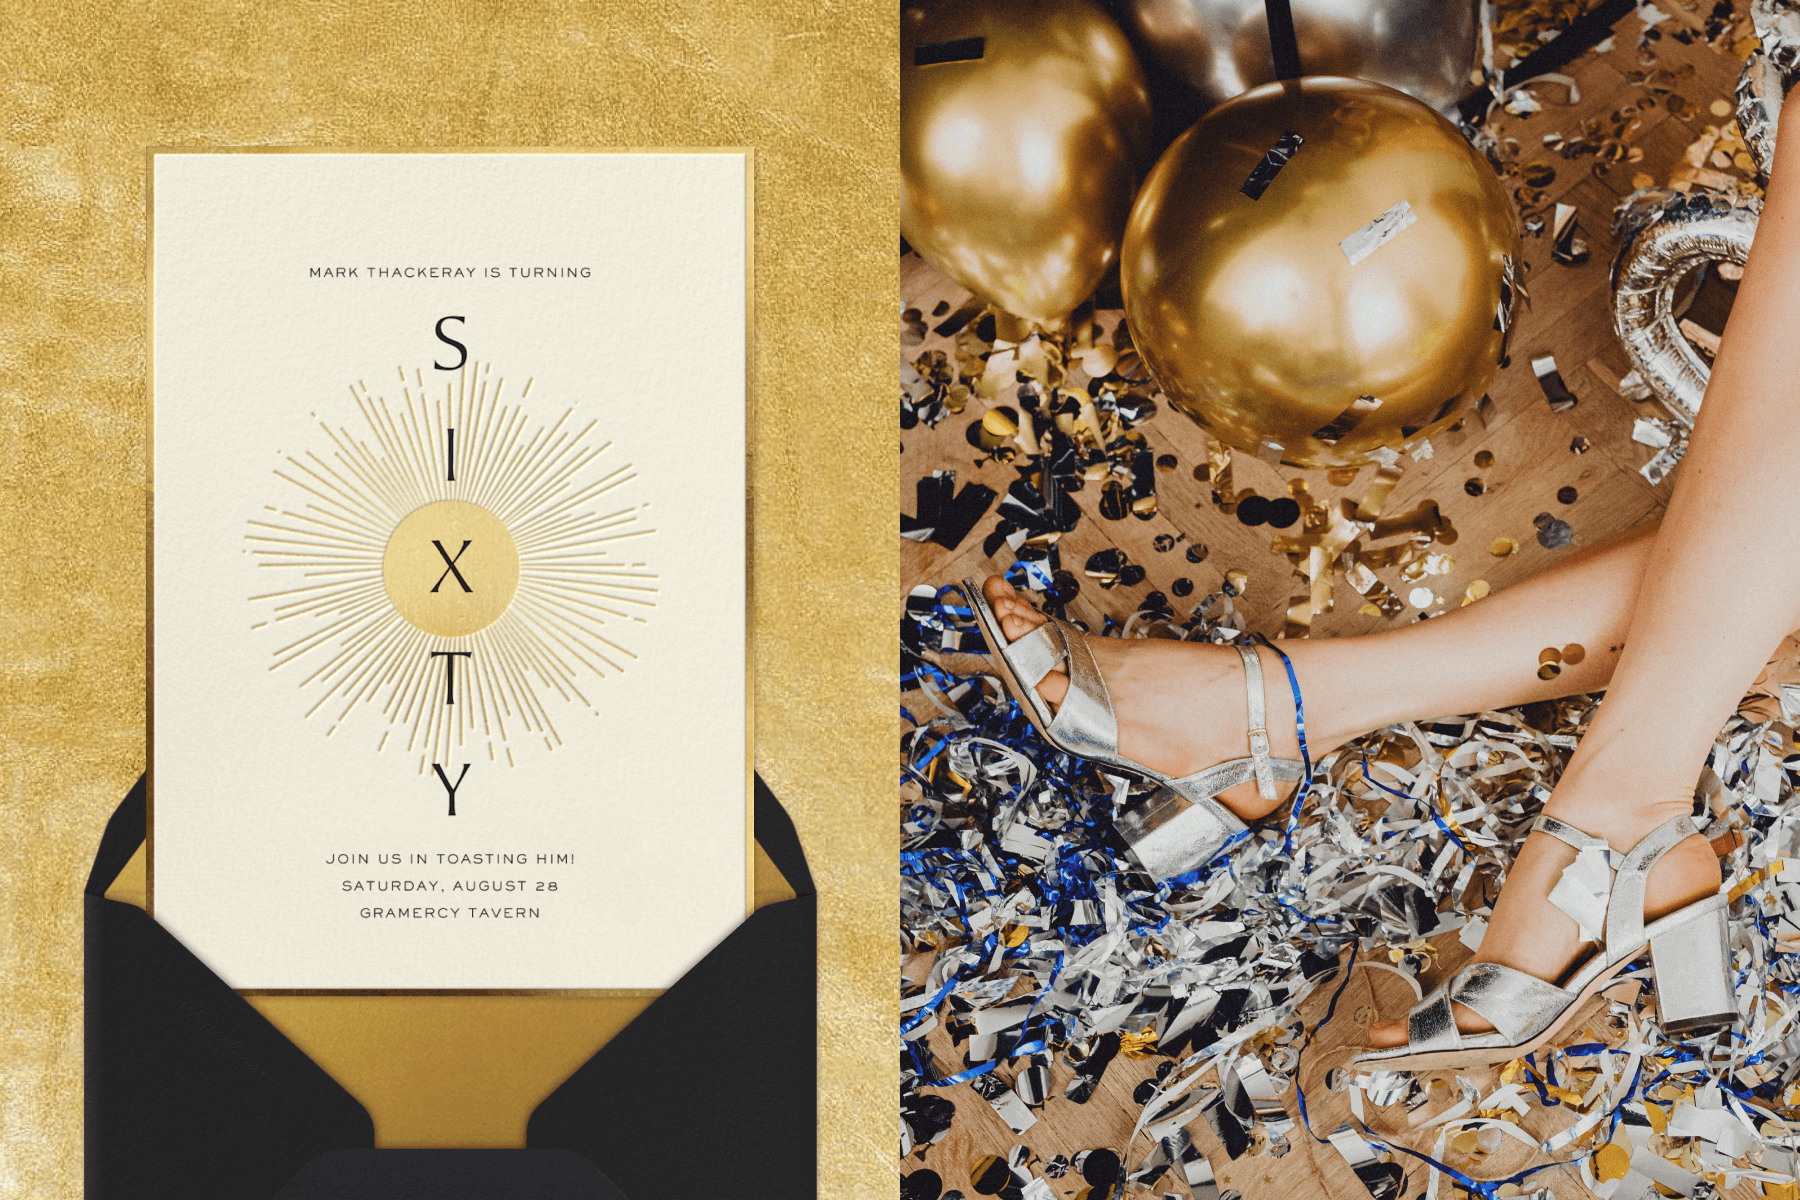 Left: “Around the Sun” invitation by Paperless Post featuring an illustration of a sun and vertical text on a gold background. | Right: Image of a woman’s feet in high heels surrounded by confetti.